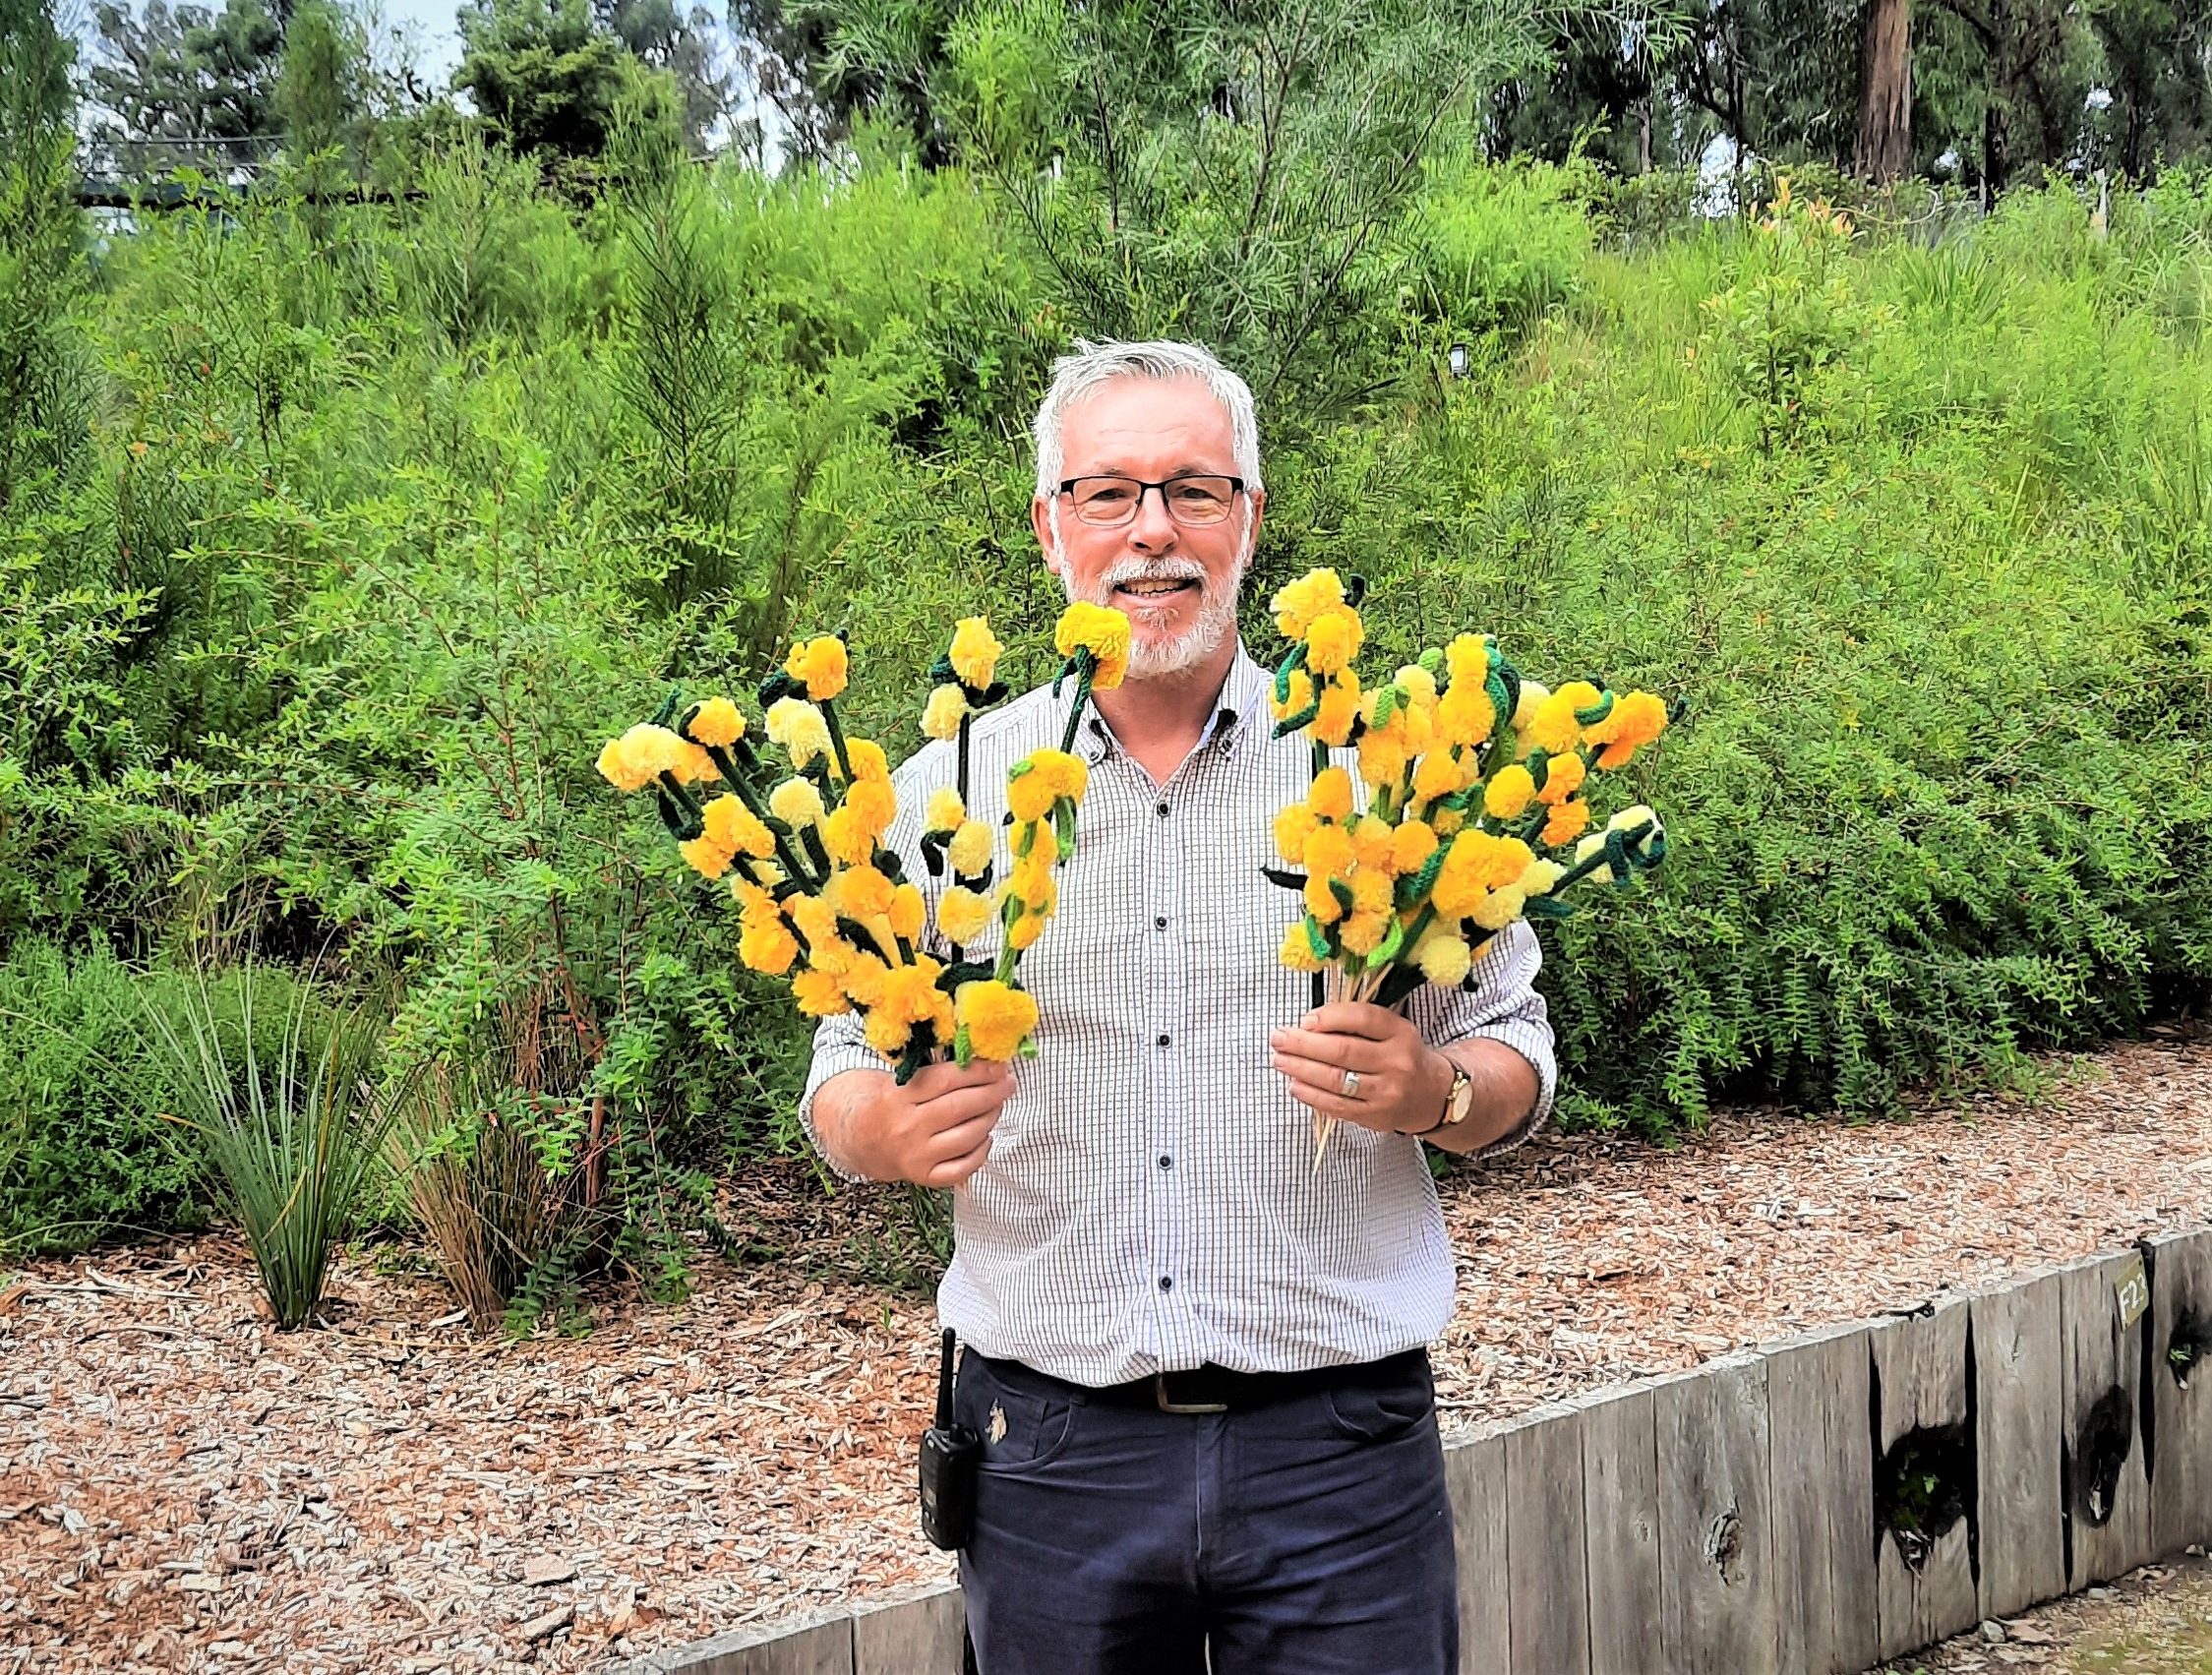 Two-week forest festival will celebrate all things green at Eurobodalla's botanic gardens